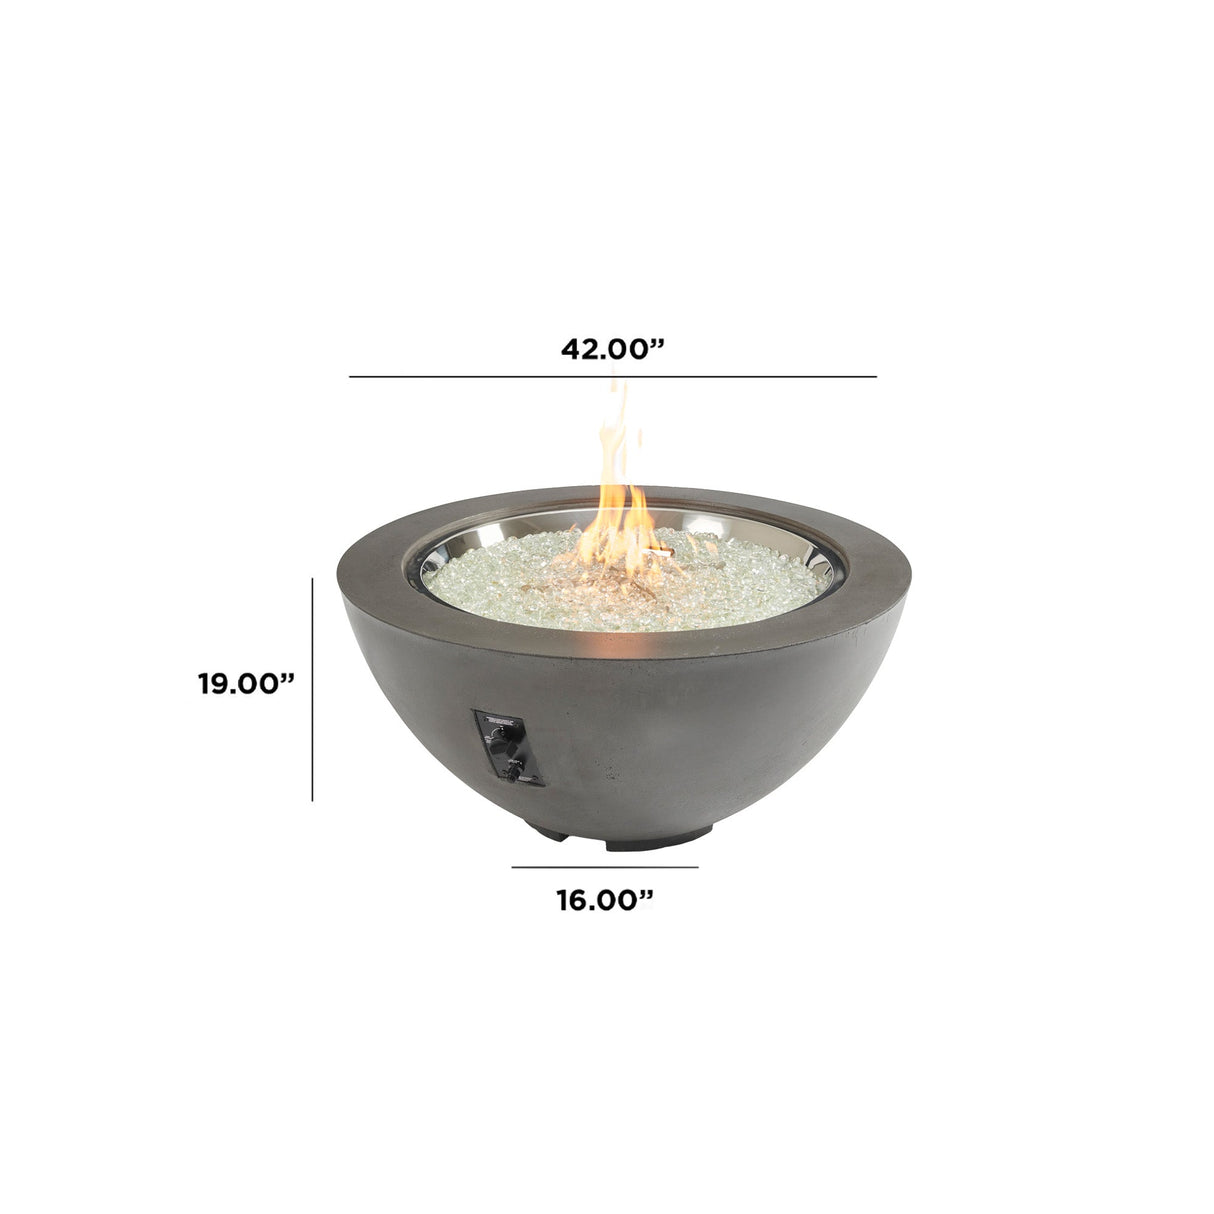 Dimensions overlaid on a Midnight Mist Cove Round Gas Fire Pit Bowl 42"